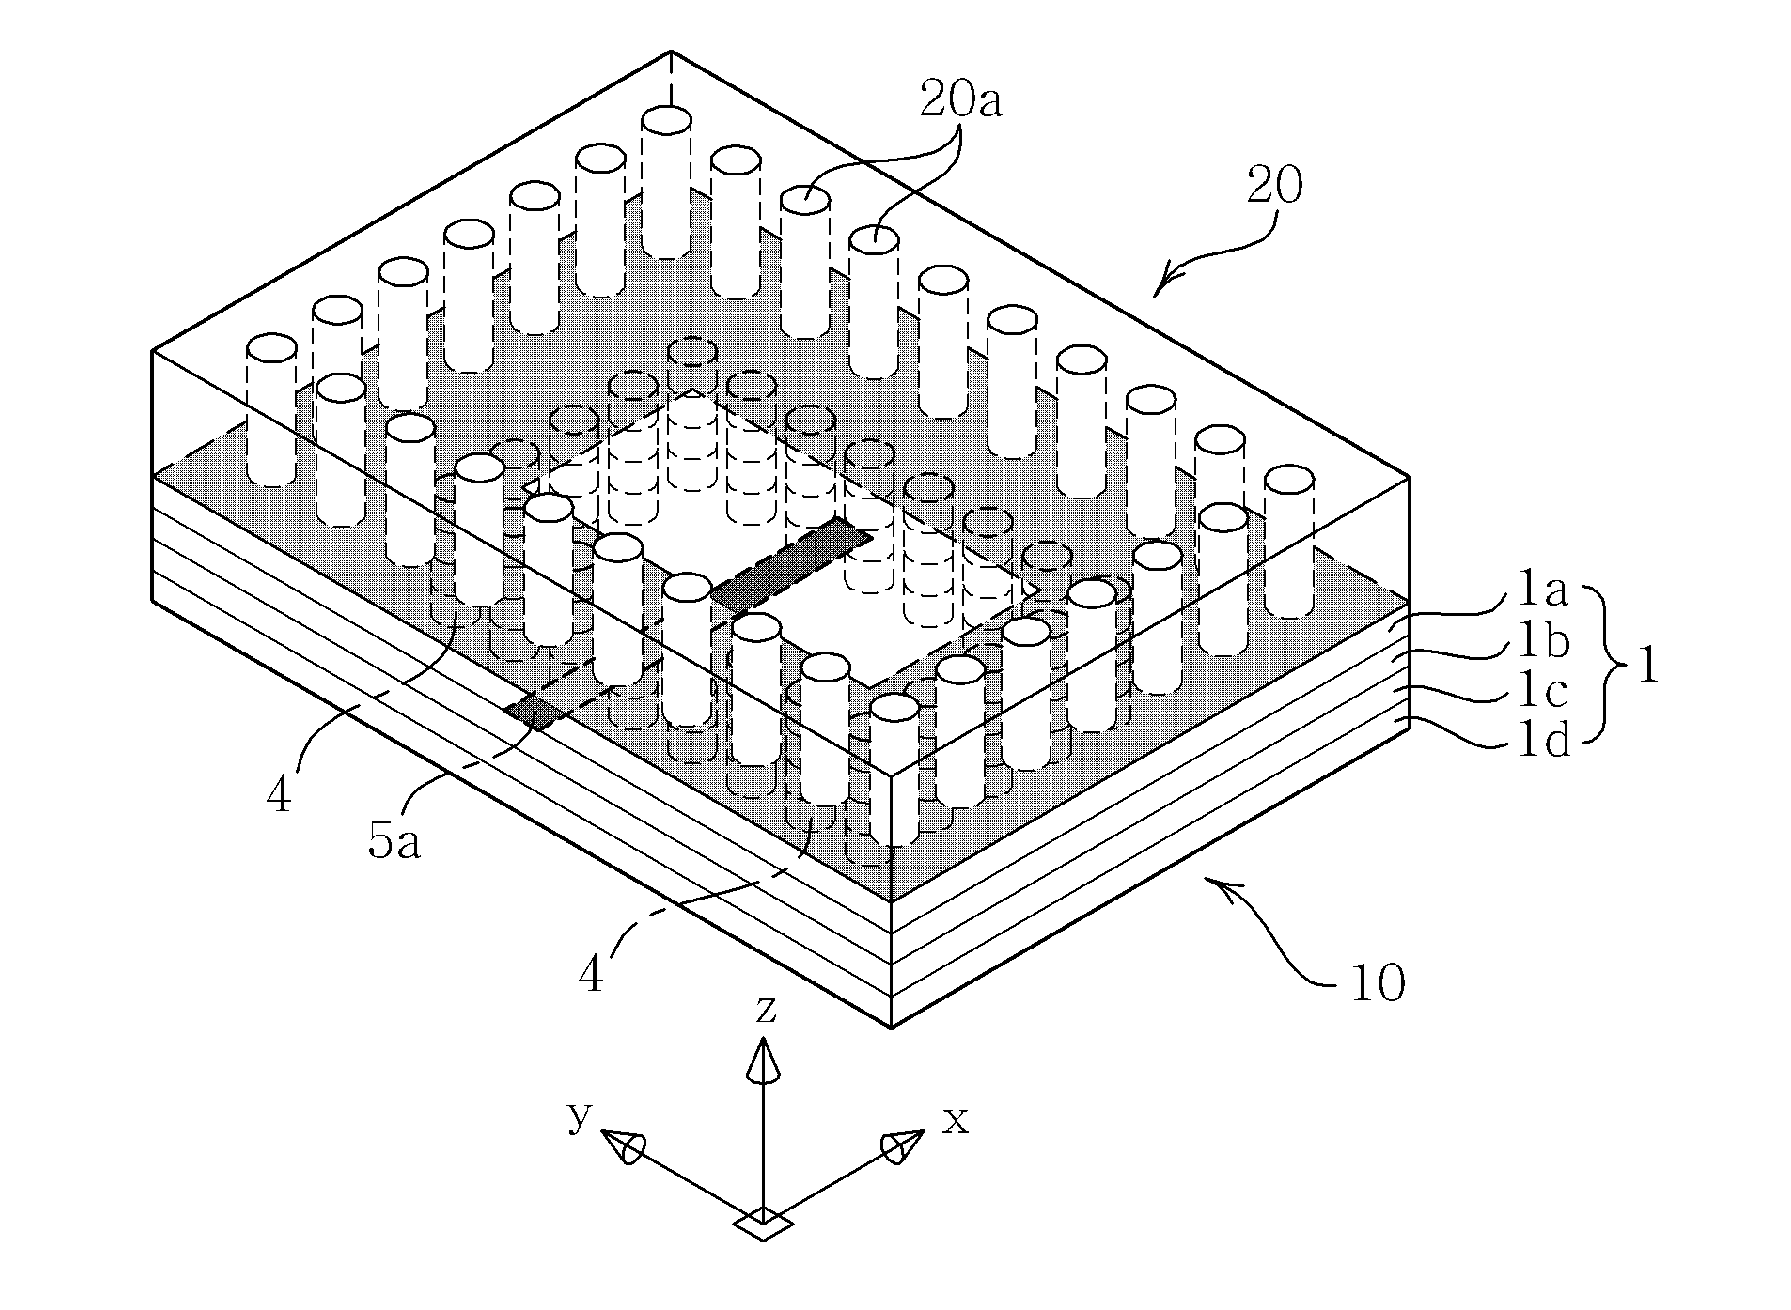 Dielectric resonant antenna using a matching substrate